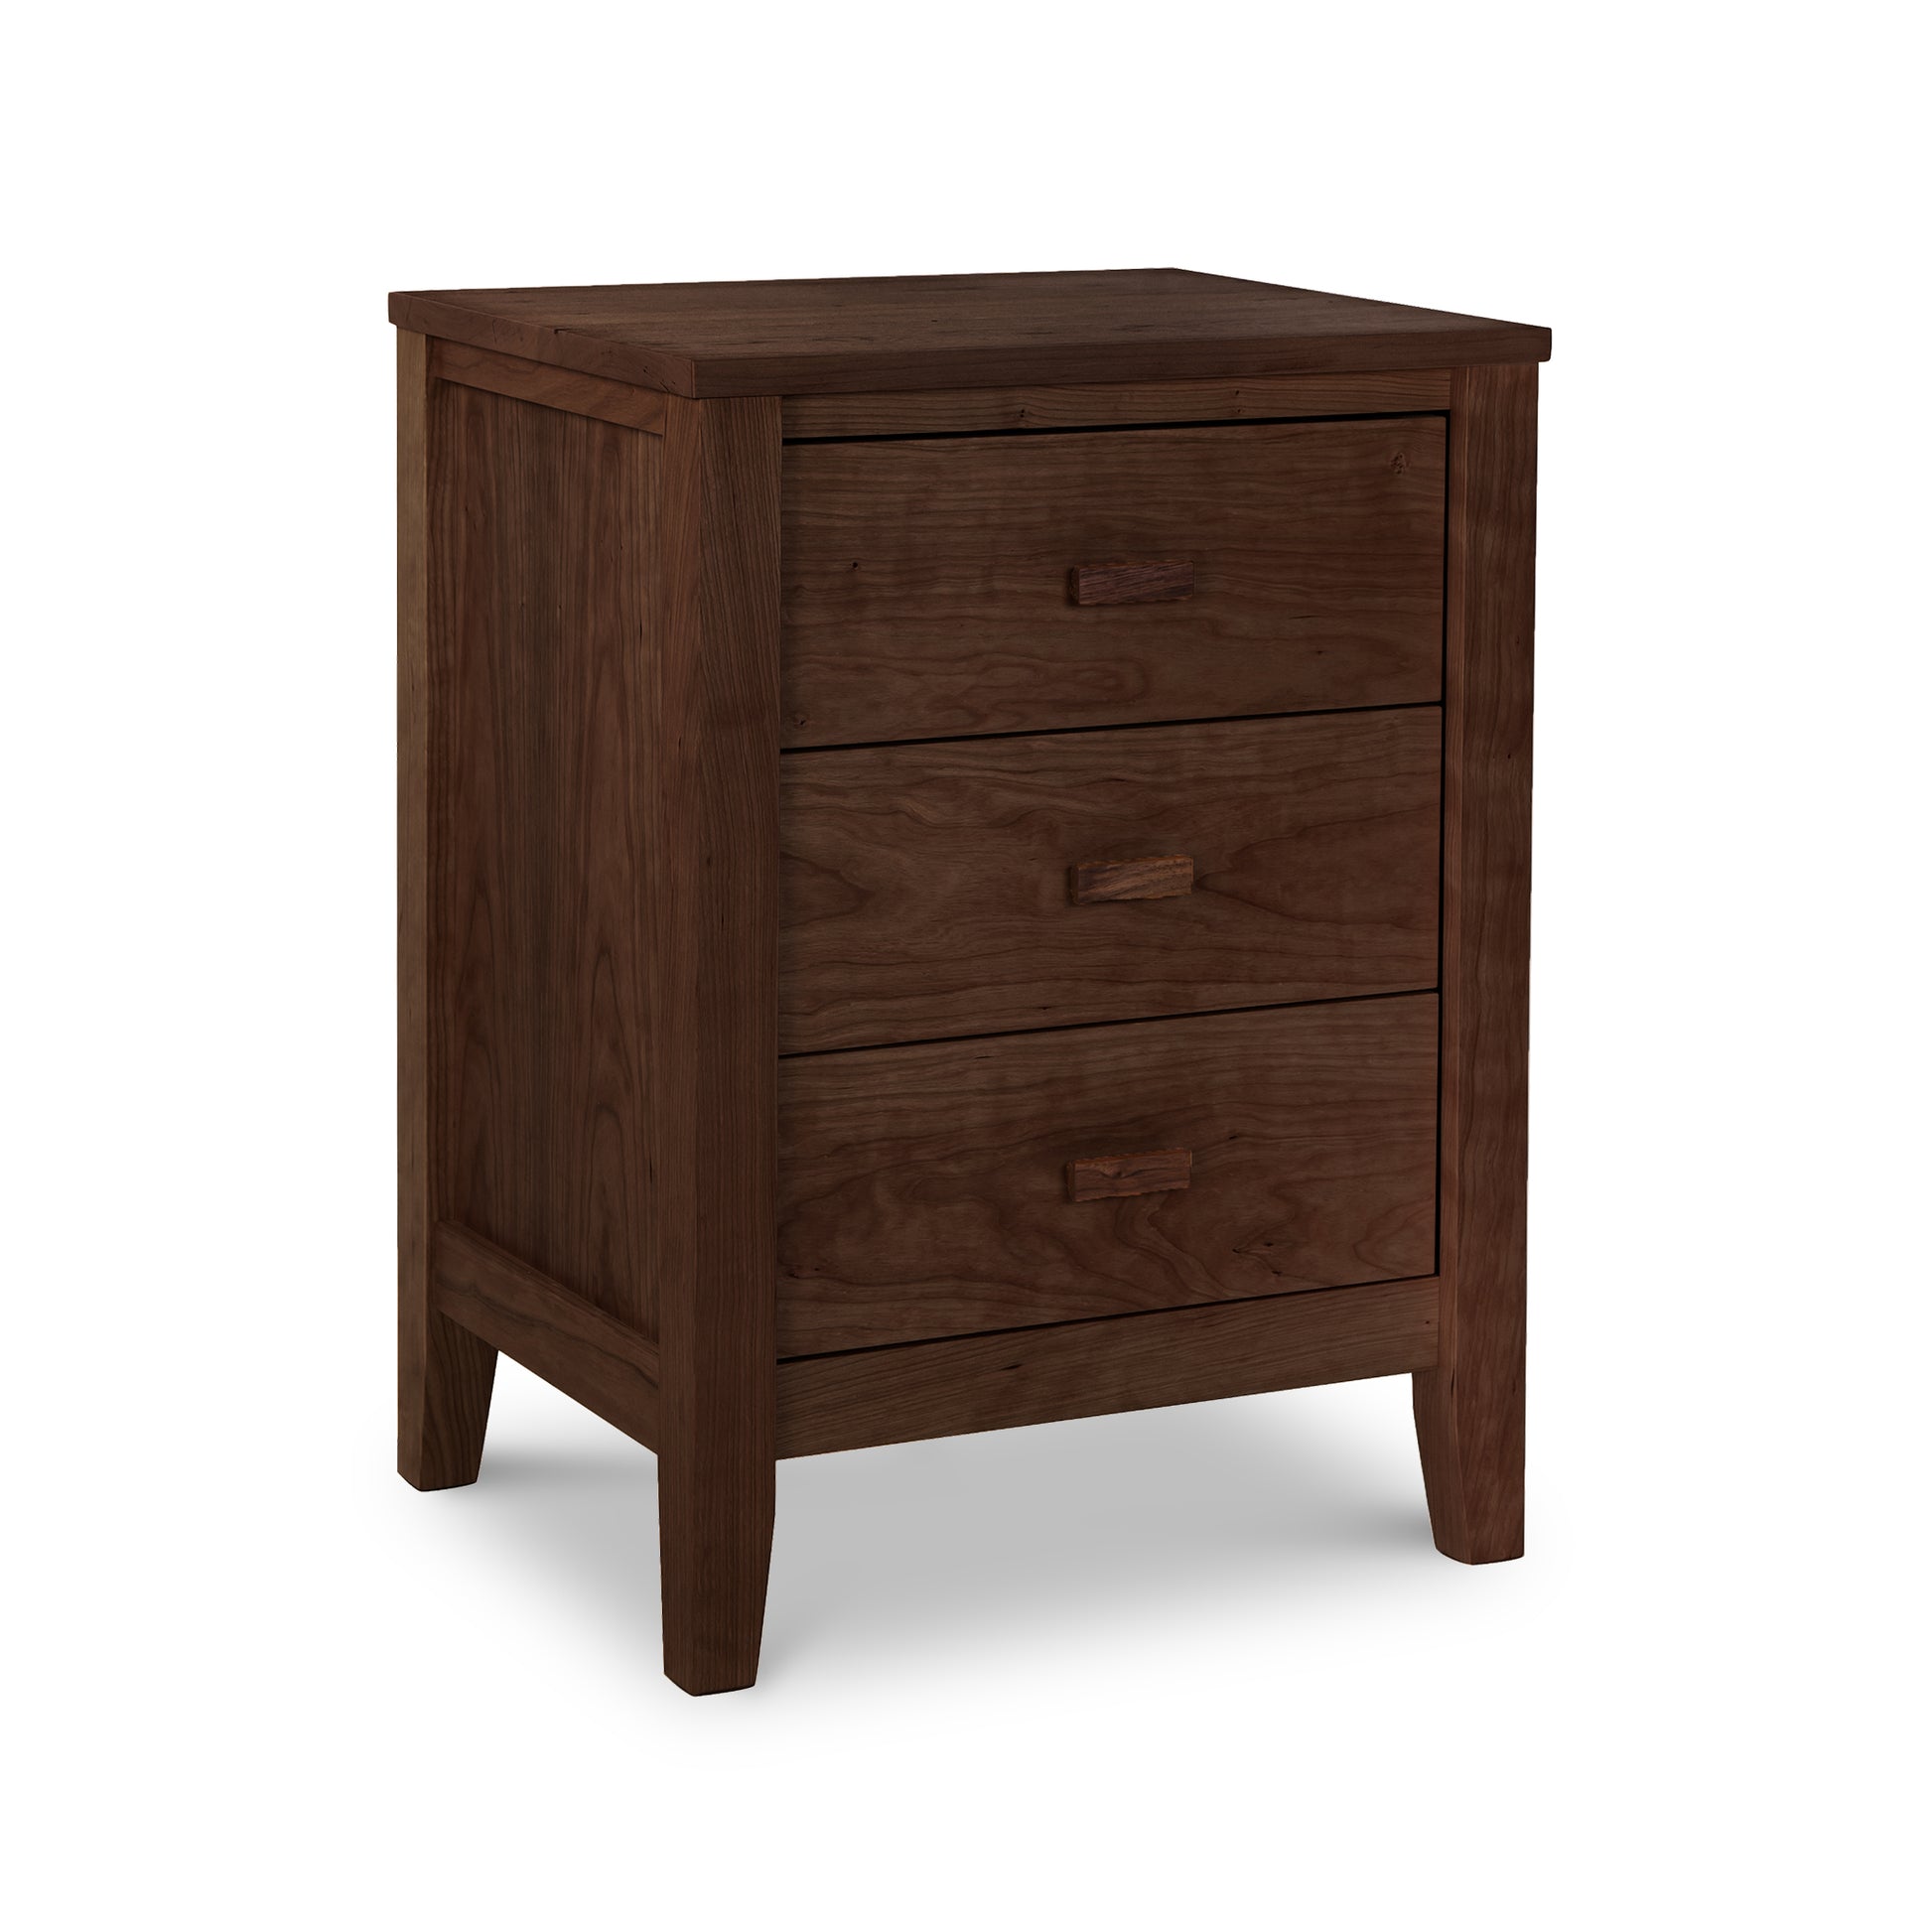 An Maple Corner Woodworks Andover Modern 3-Drawer Nightstand in a rich walnut finish, isolated on a white background. The drawers have simple, horizontal pull handles.